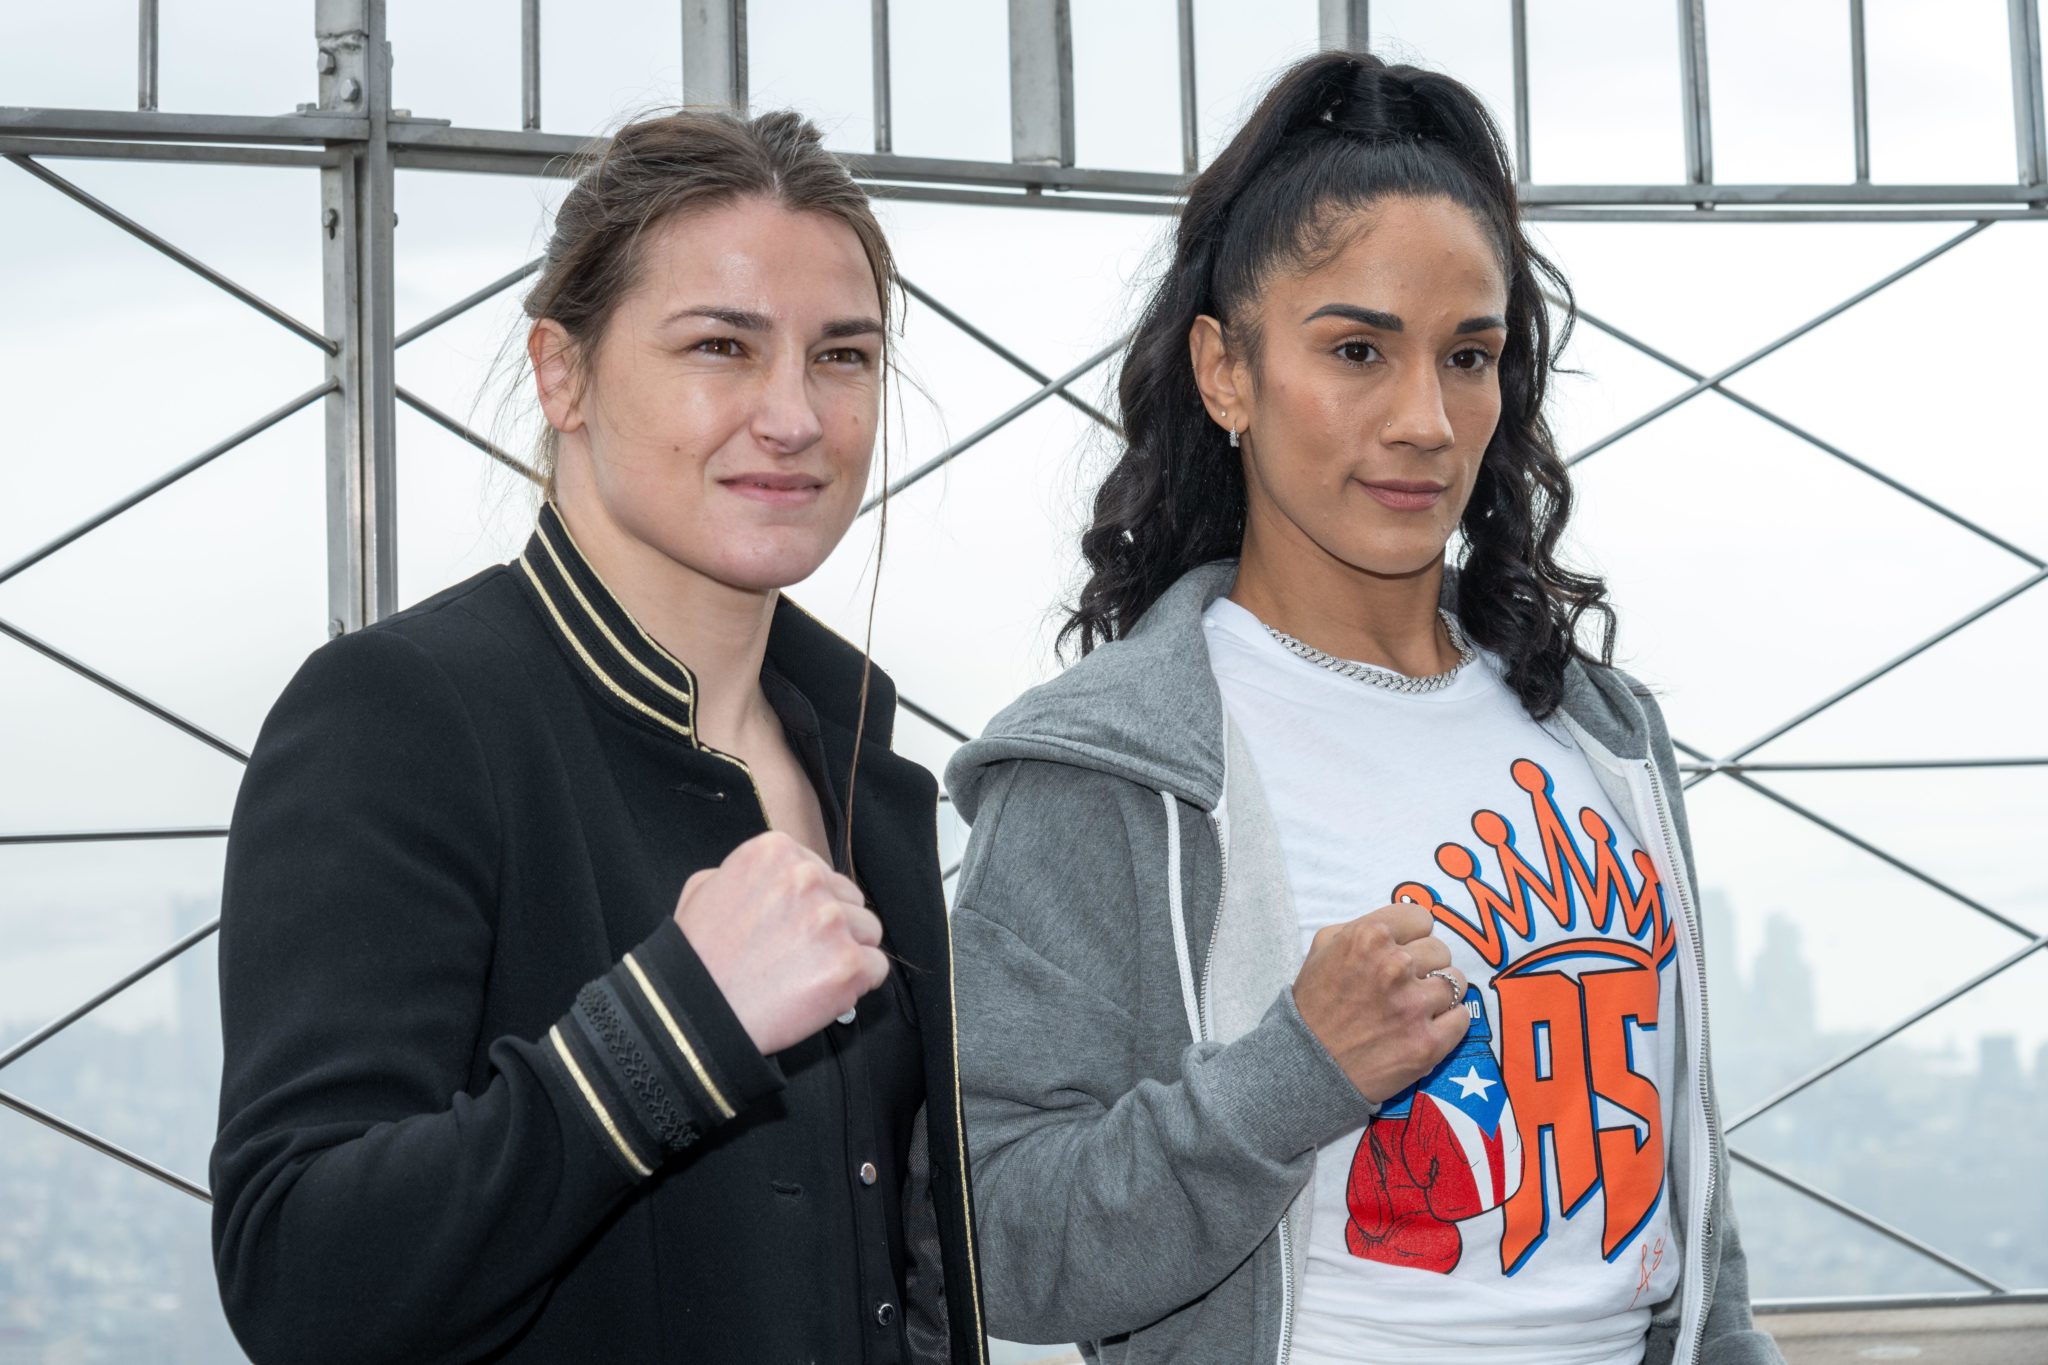 Katie Taylor (left) and Amanda Serrano of Puerto Rico pose during a promotional event at the observatory of the Empire State Building in New York, USA in April 2022. 